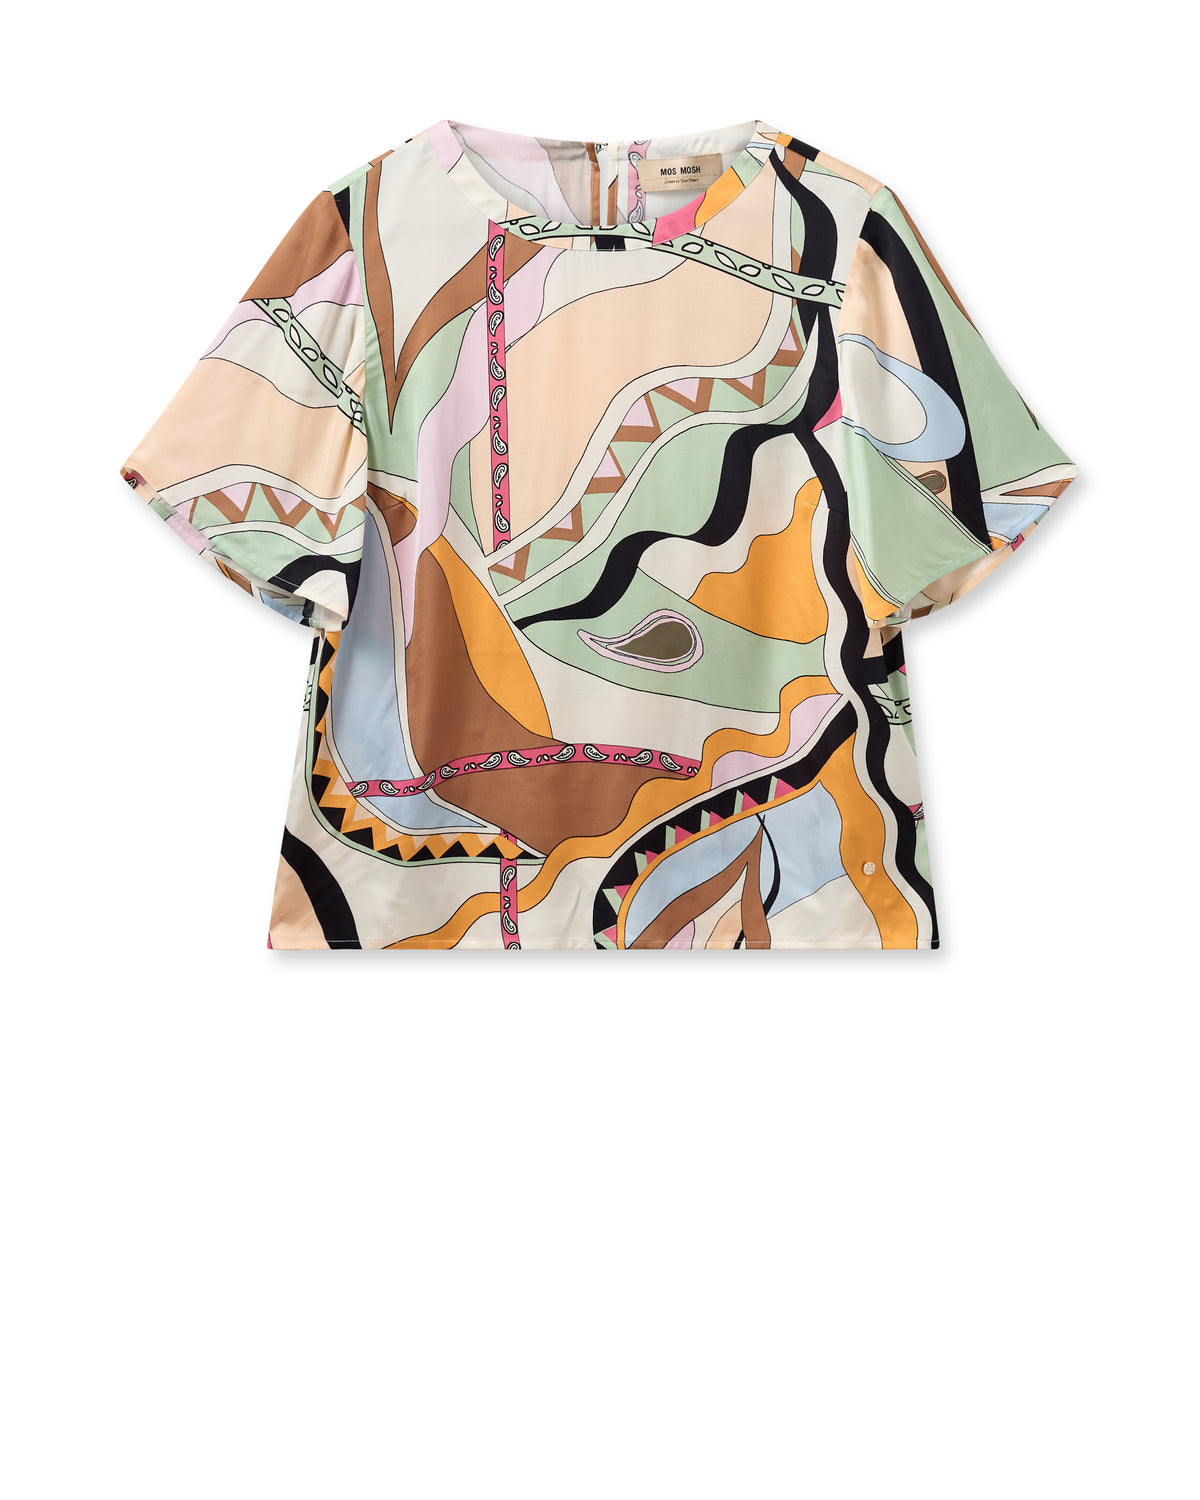 Multi coloured geometric print shell top with crew neckline short sleeves and straight hem